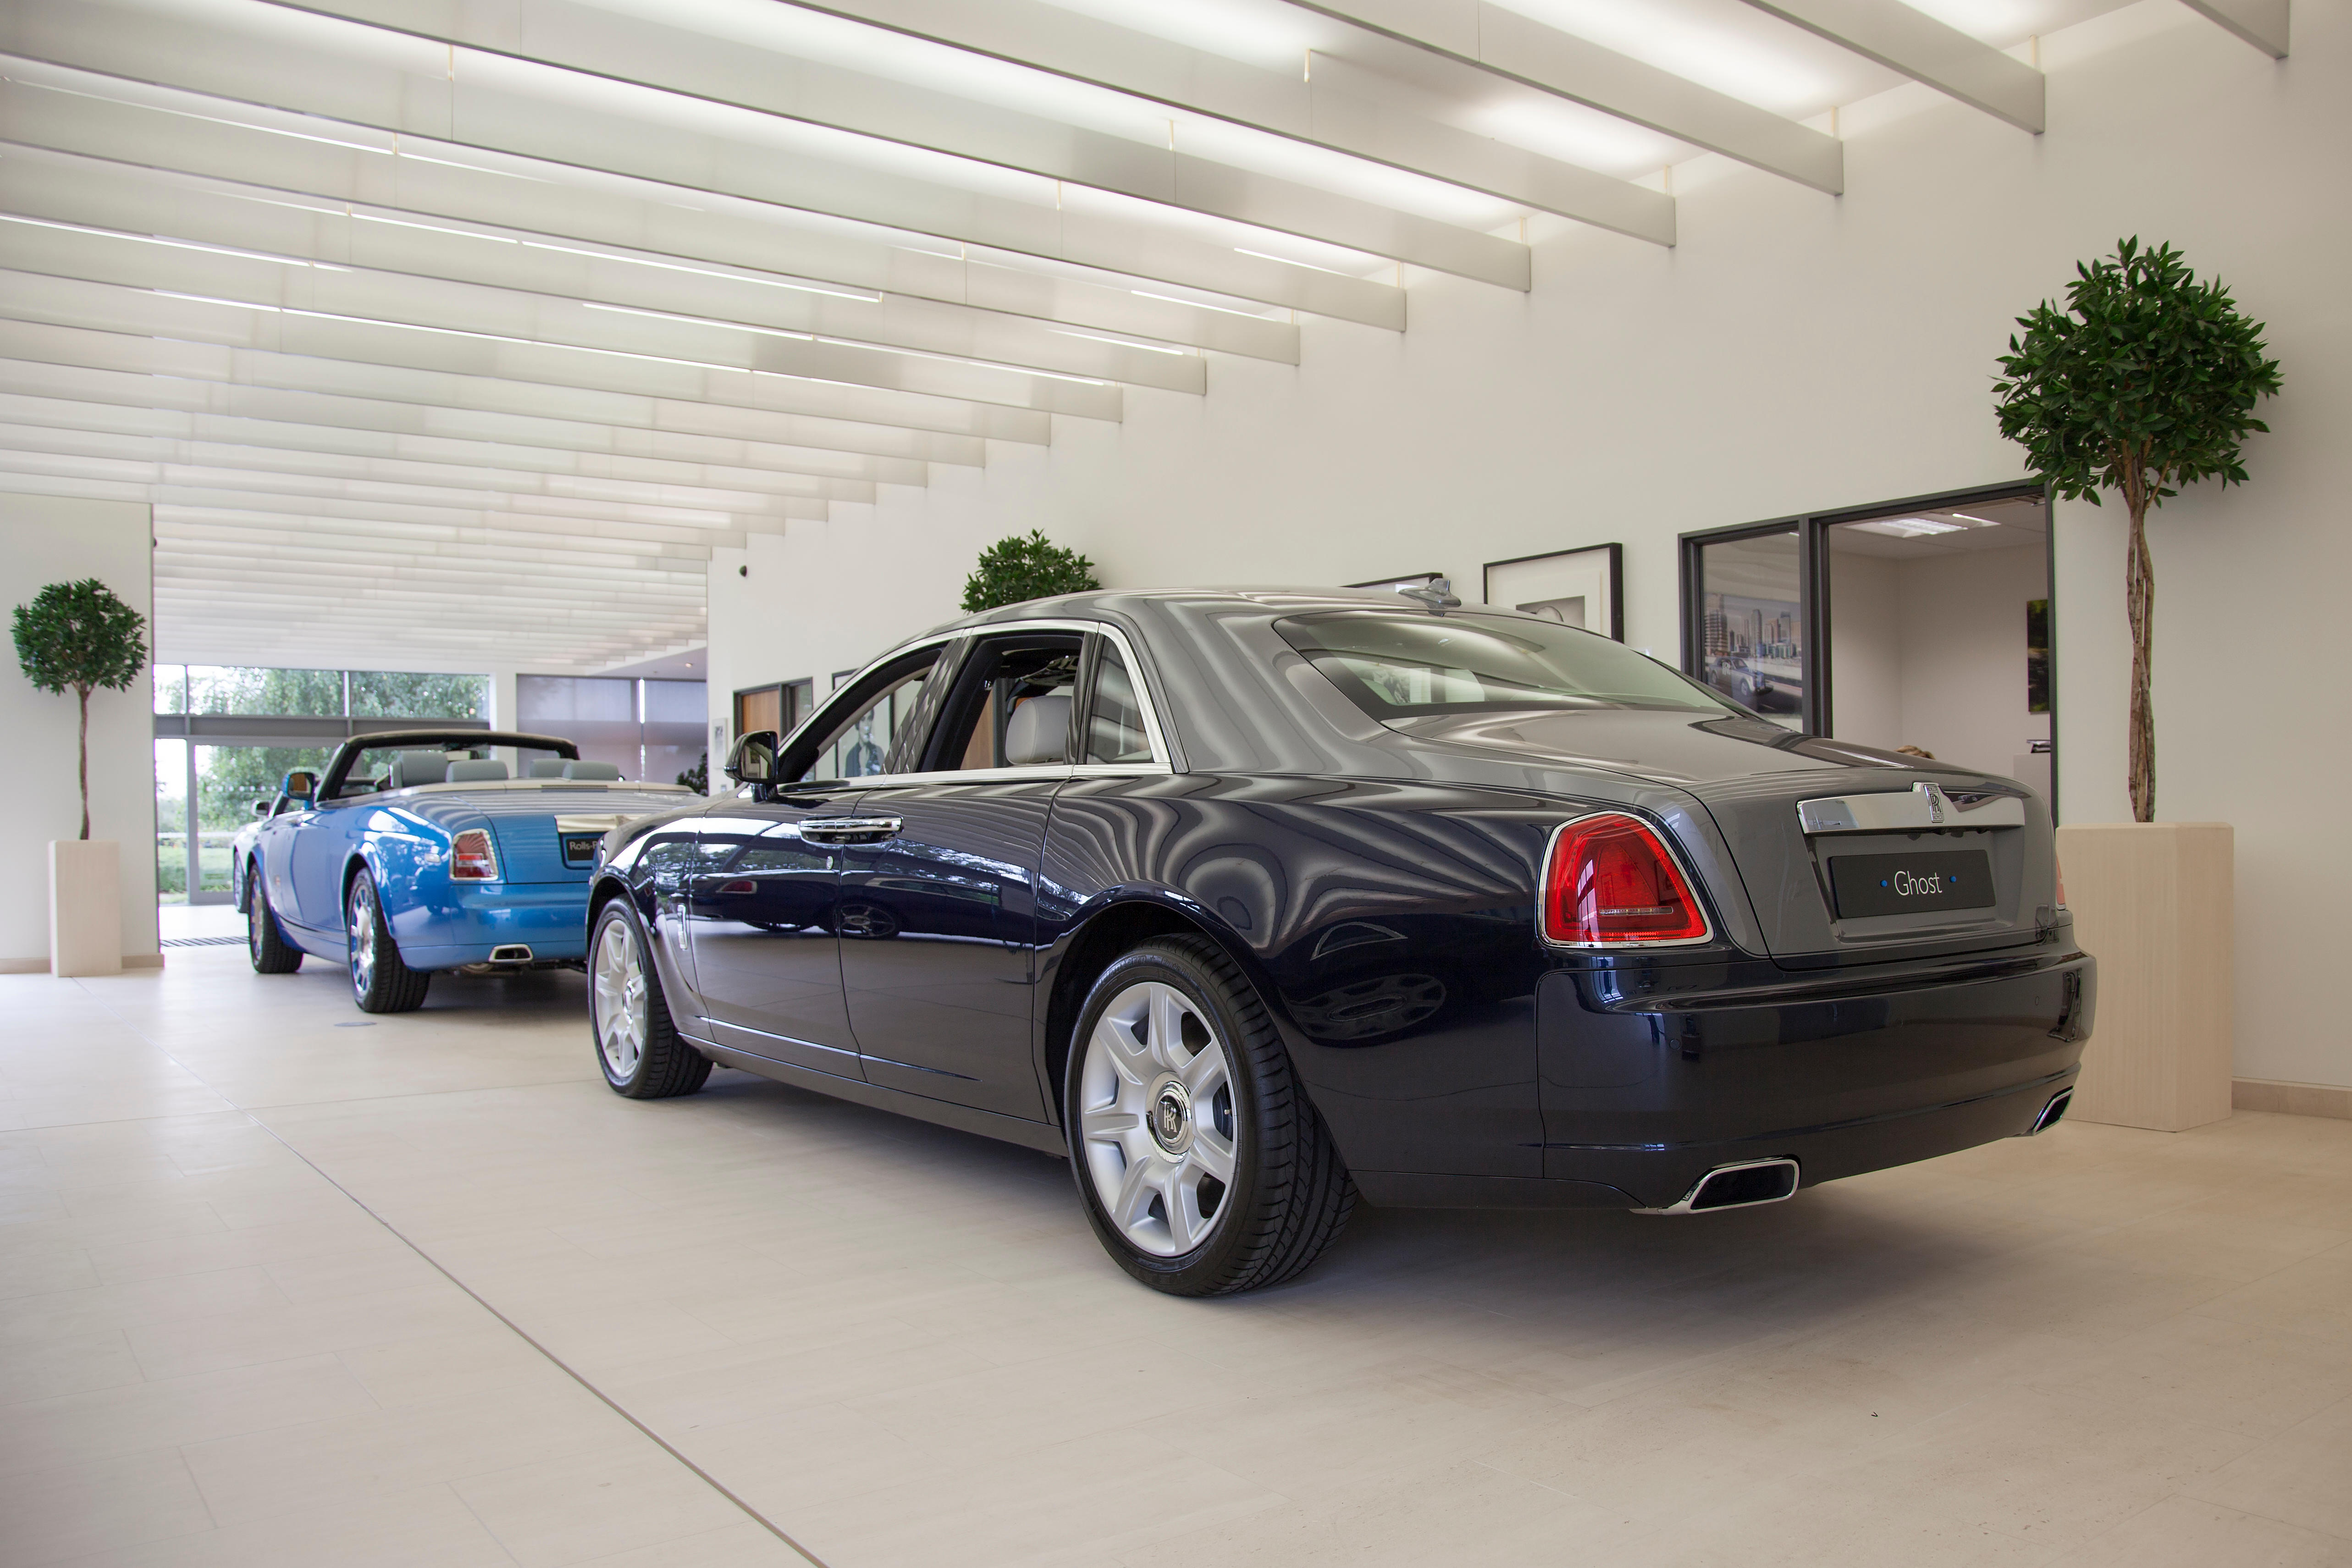 Rolls-Royce Motor Cars Manchester Wilmslow 01625 409383